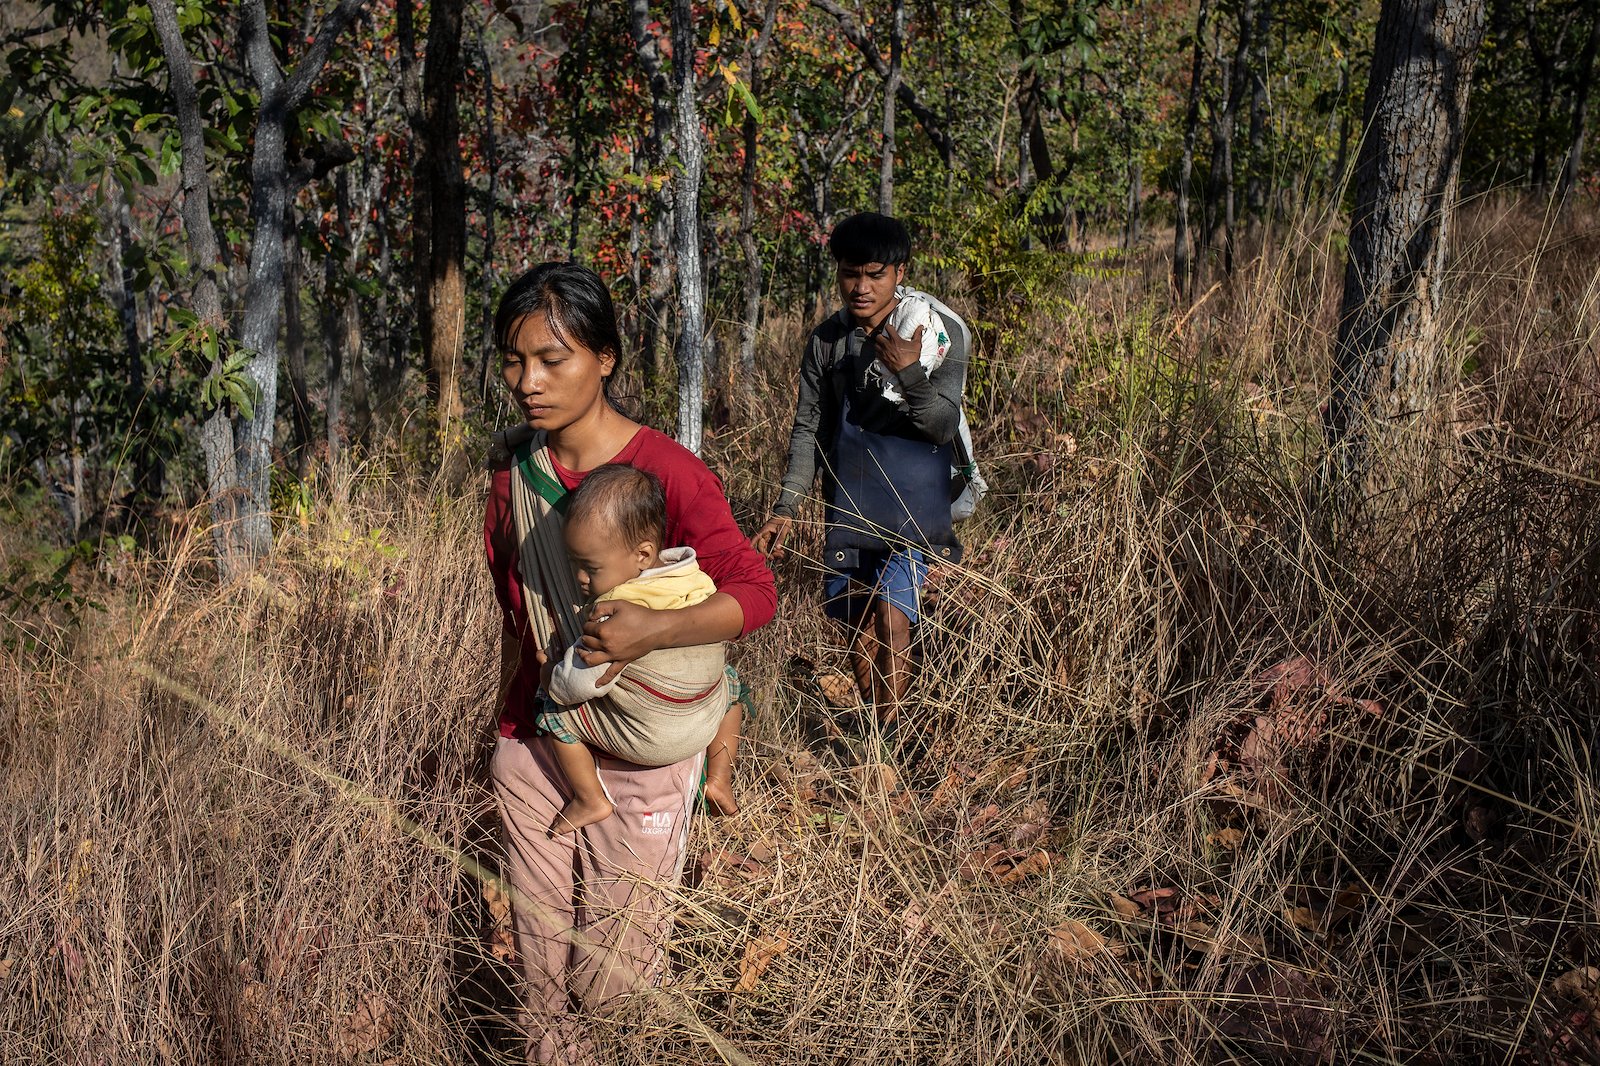 Maw Pray Myar, her daughter and husband flee to Thailand from Kayah State, eastern Myanmar. Credit: UNOCHA/Siegfried Modola